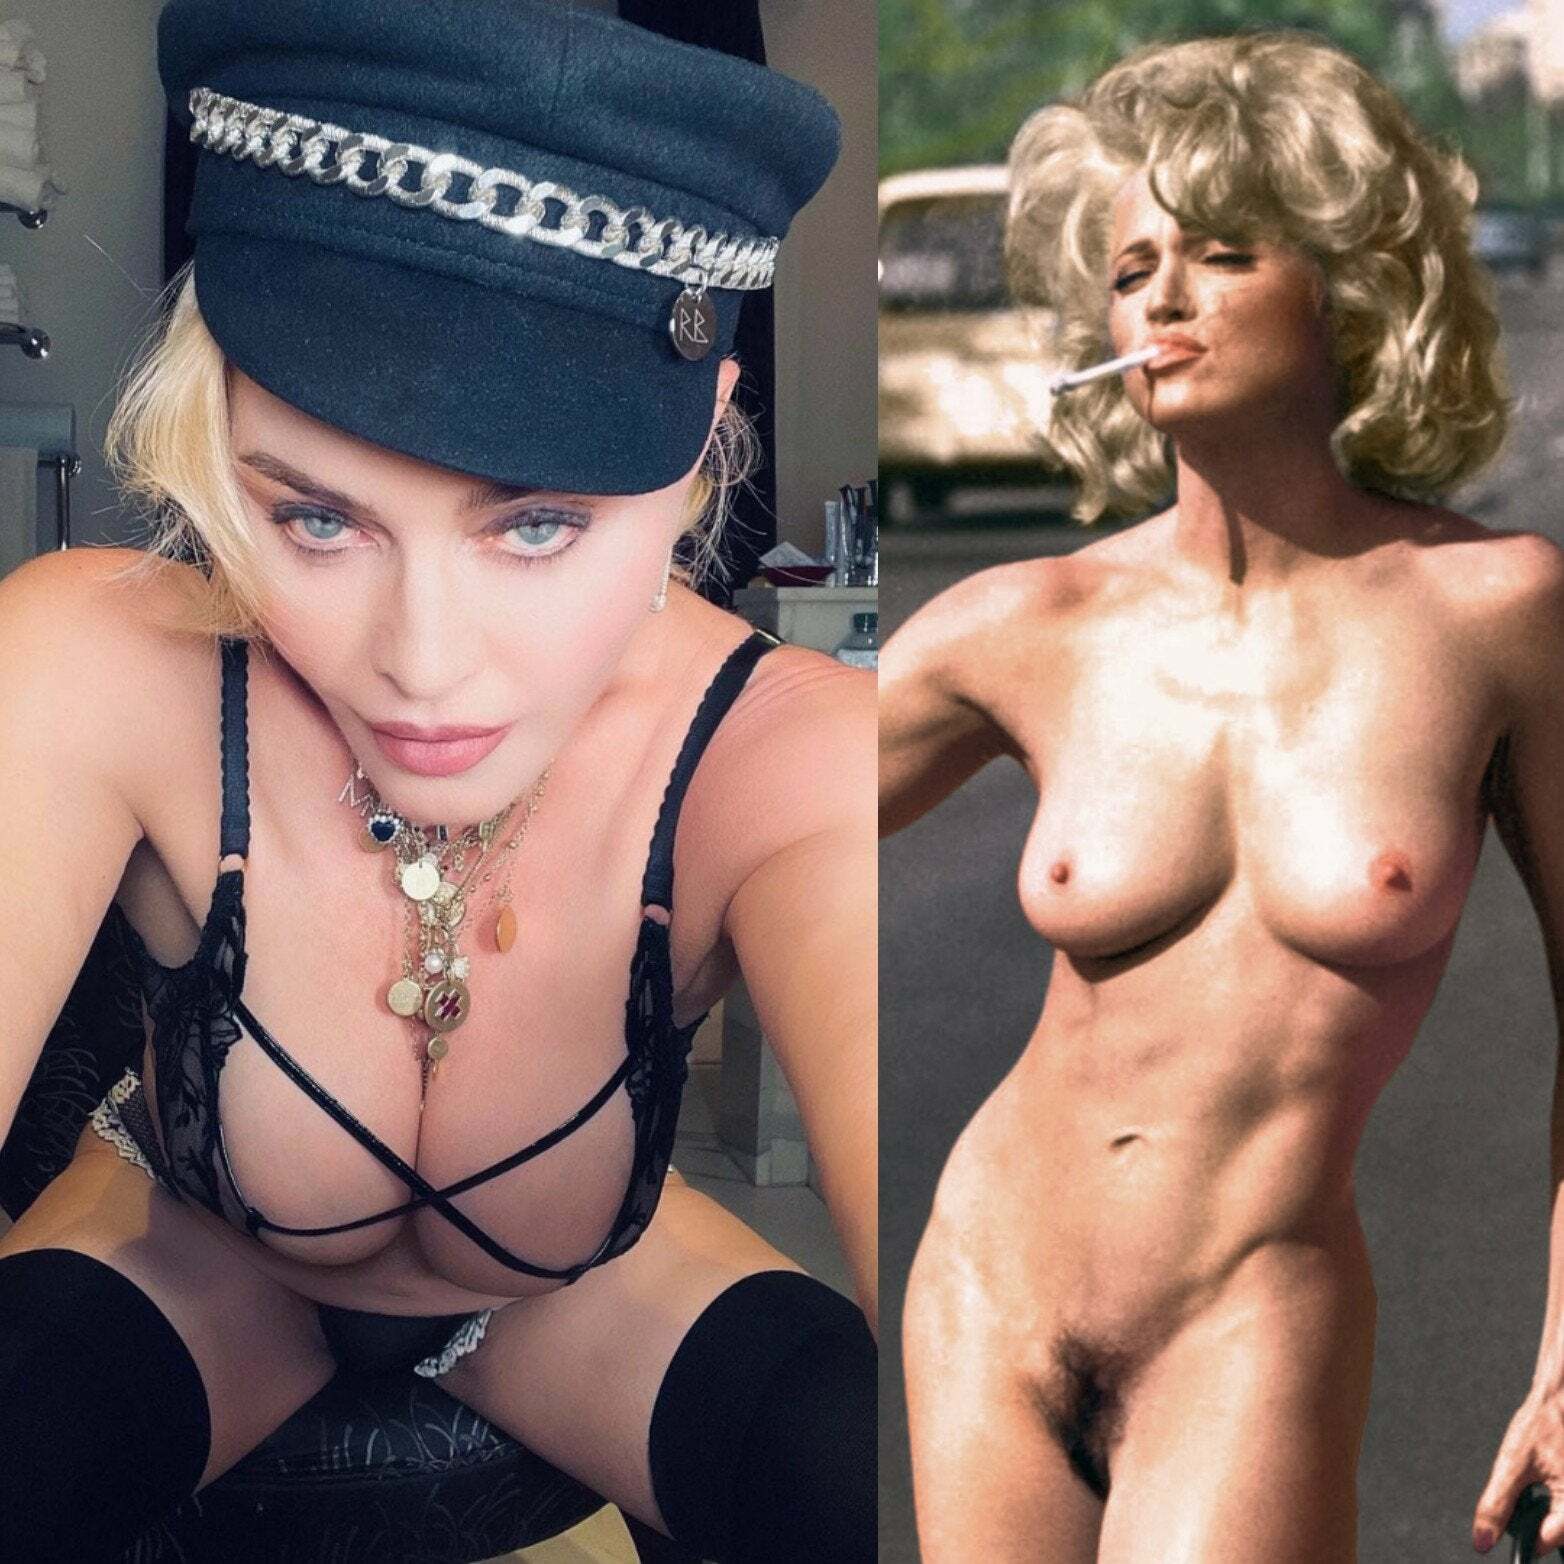 Old or young. Madonna is very fuckable.